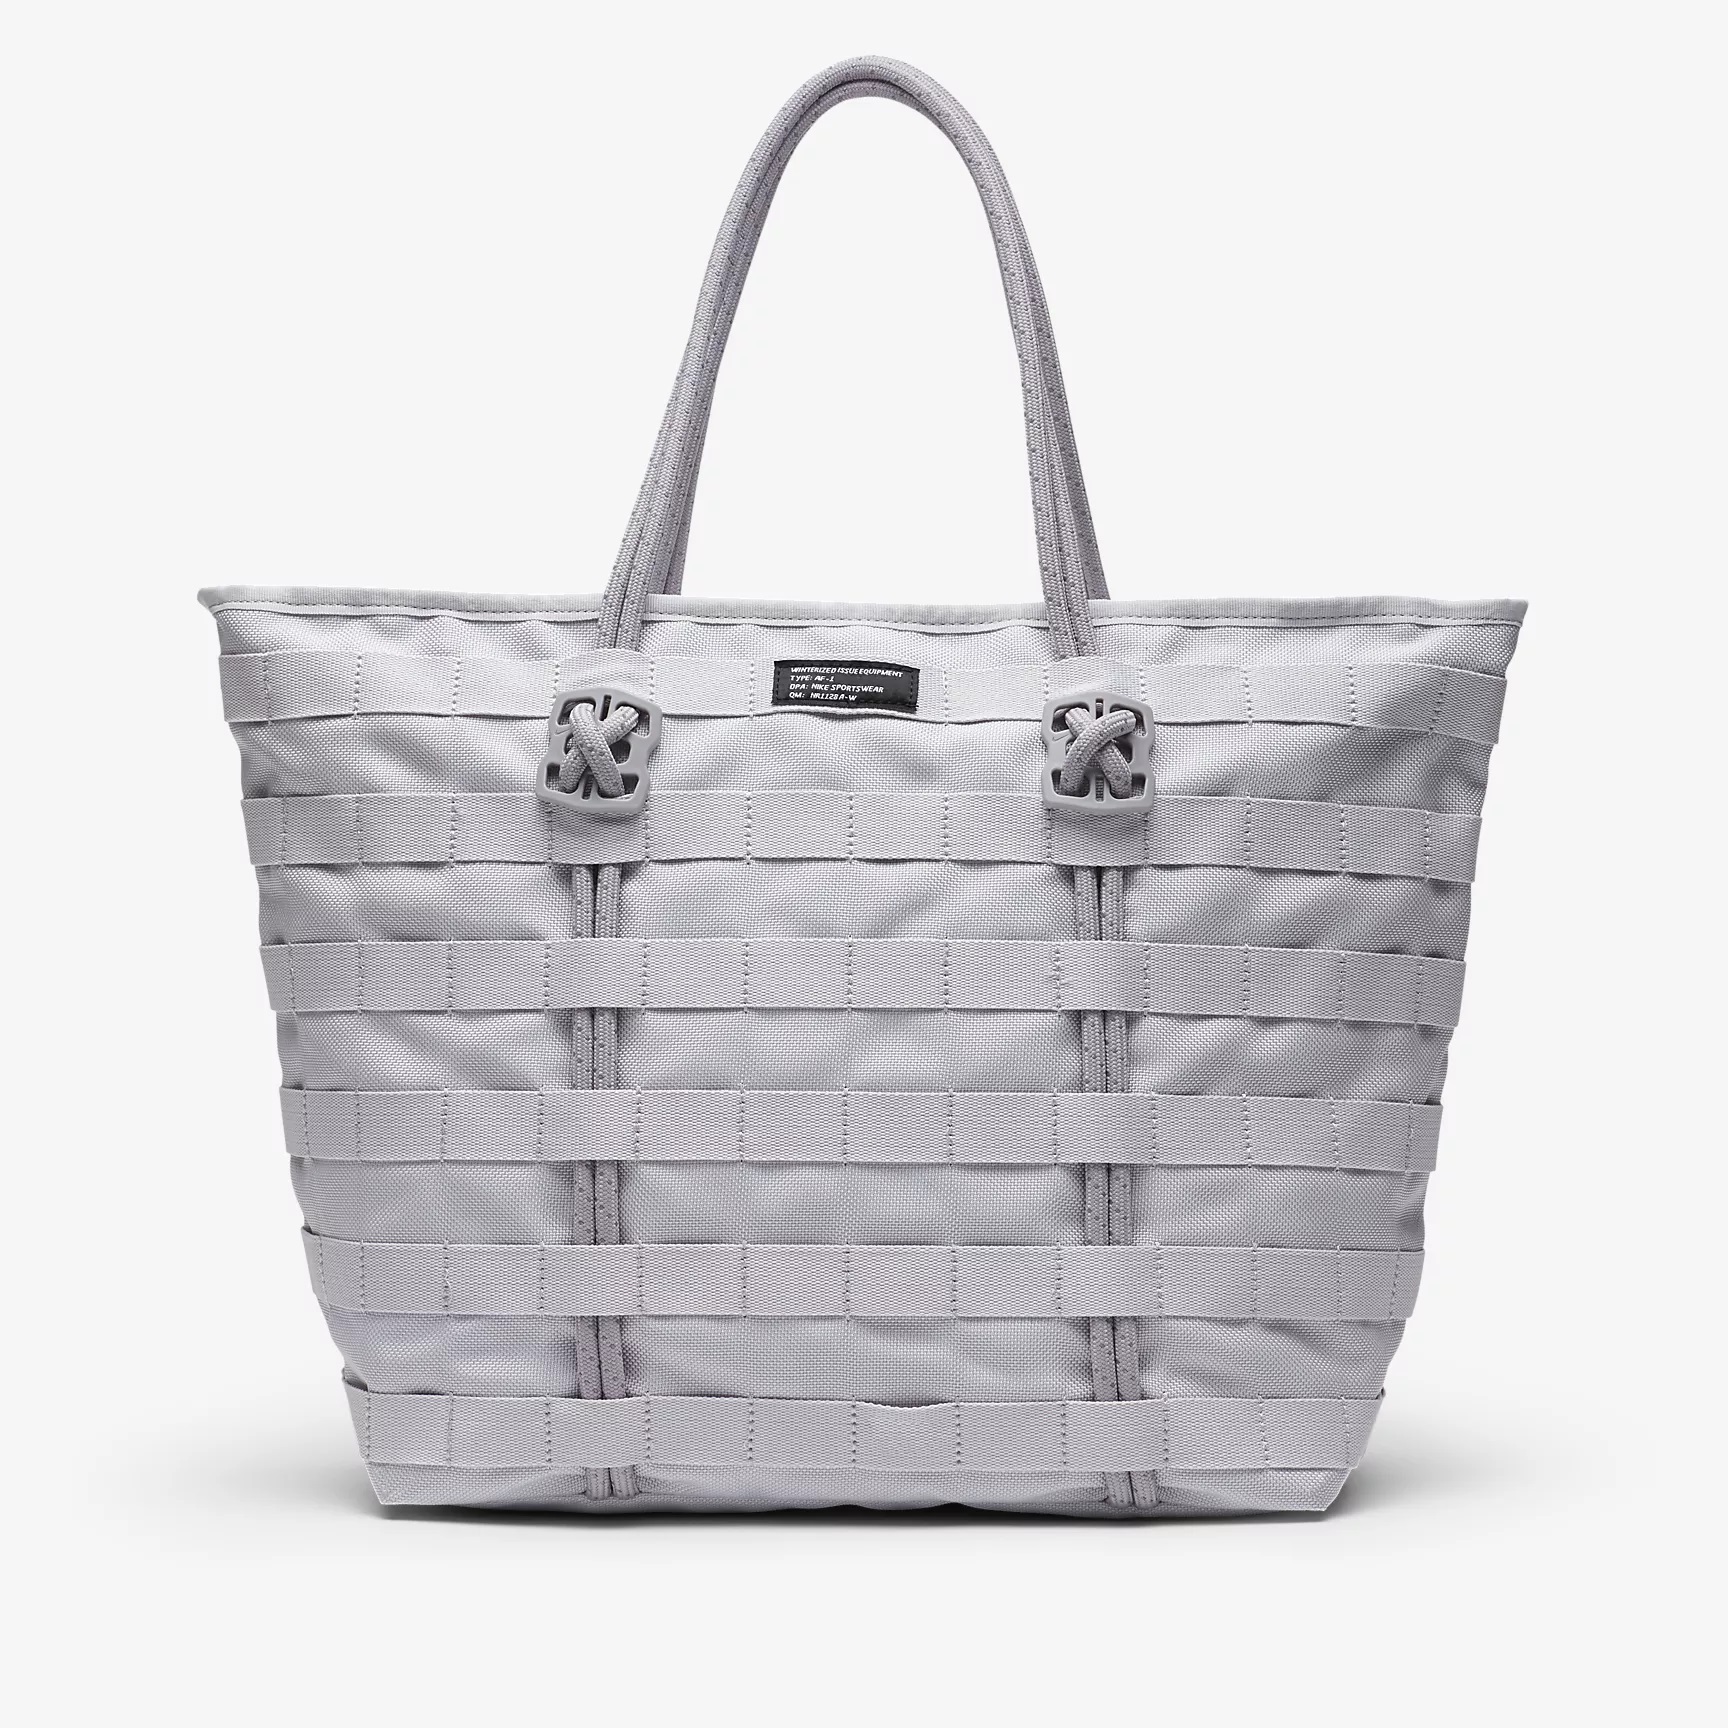 Nike Restocks Sturdy Canvas Tote Bag In Four Colors